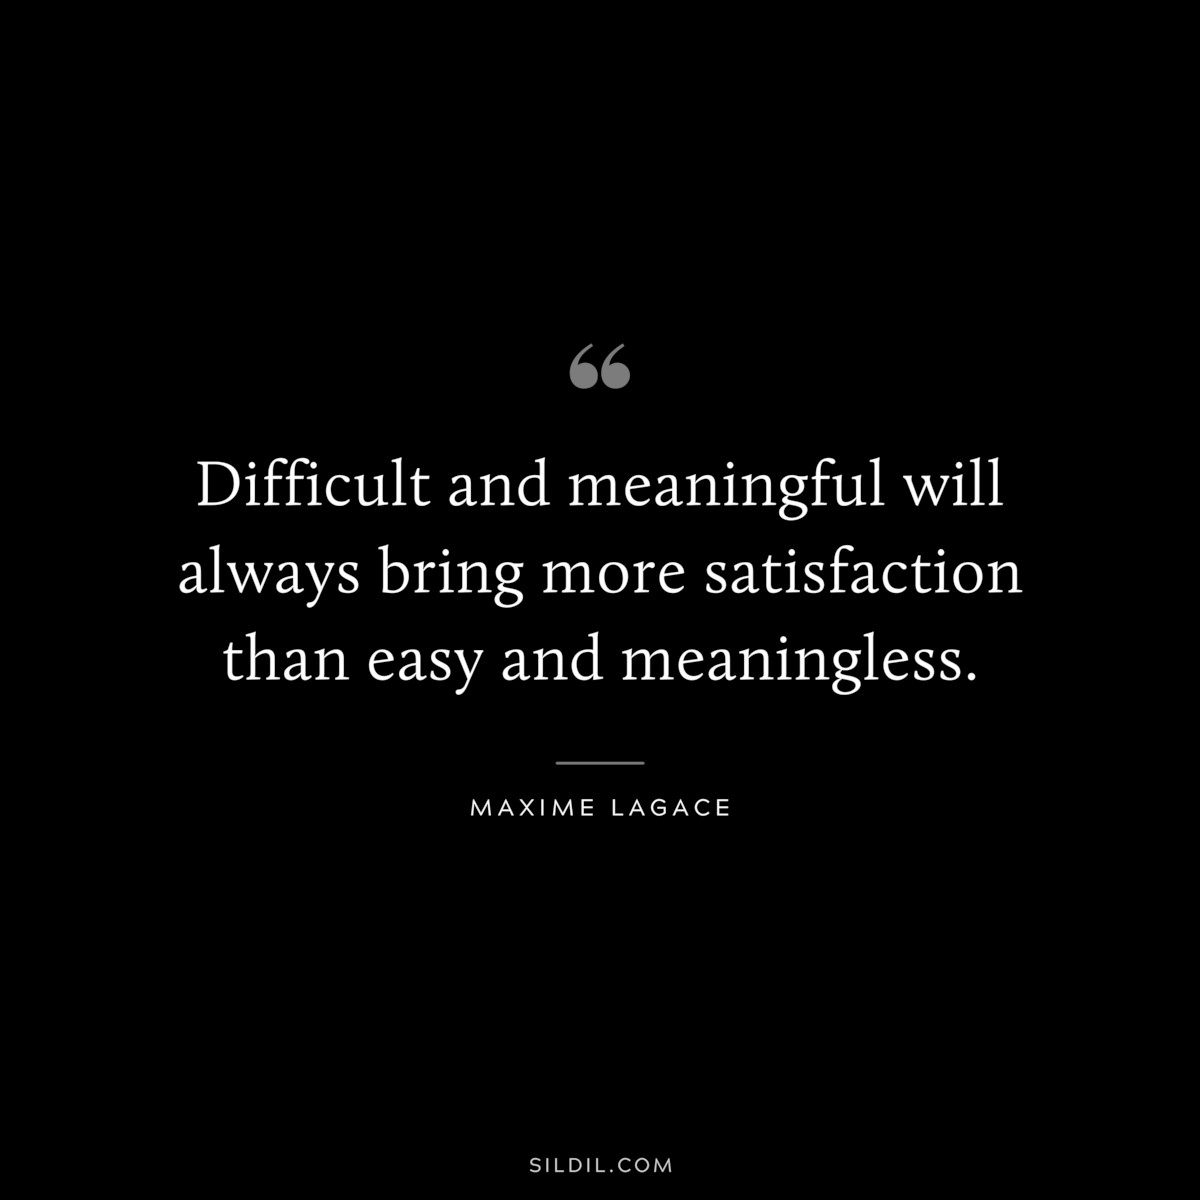 Difficult and meaningful will always bring more satisfaction than easy and meaningless. ― Maxime Lagace